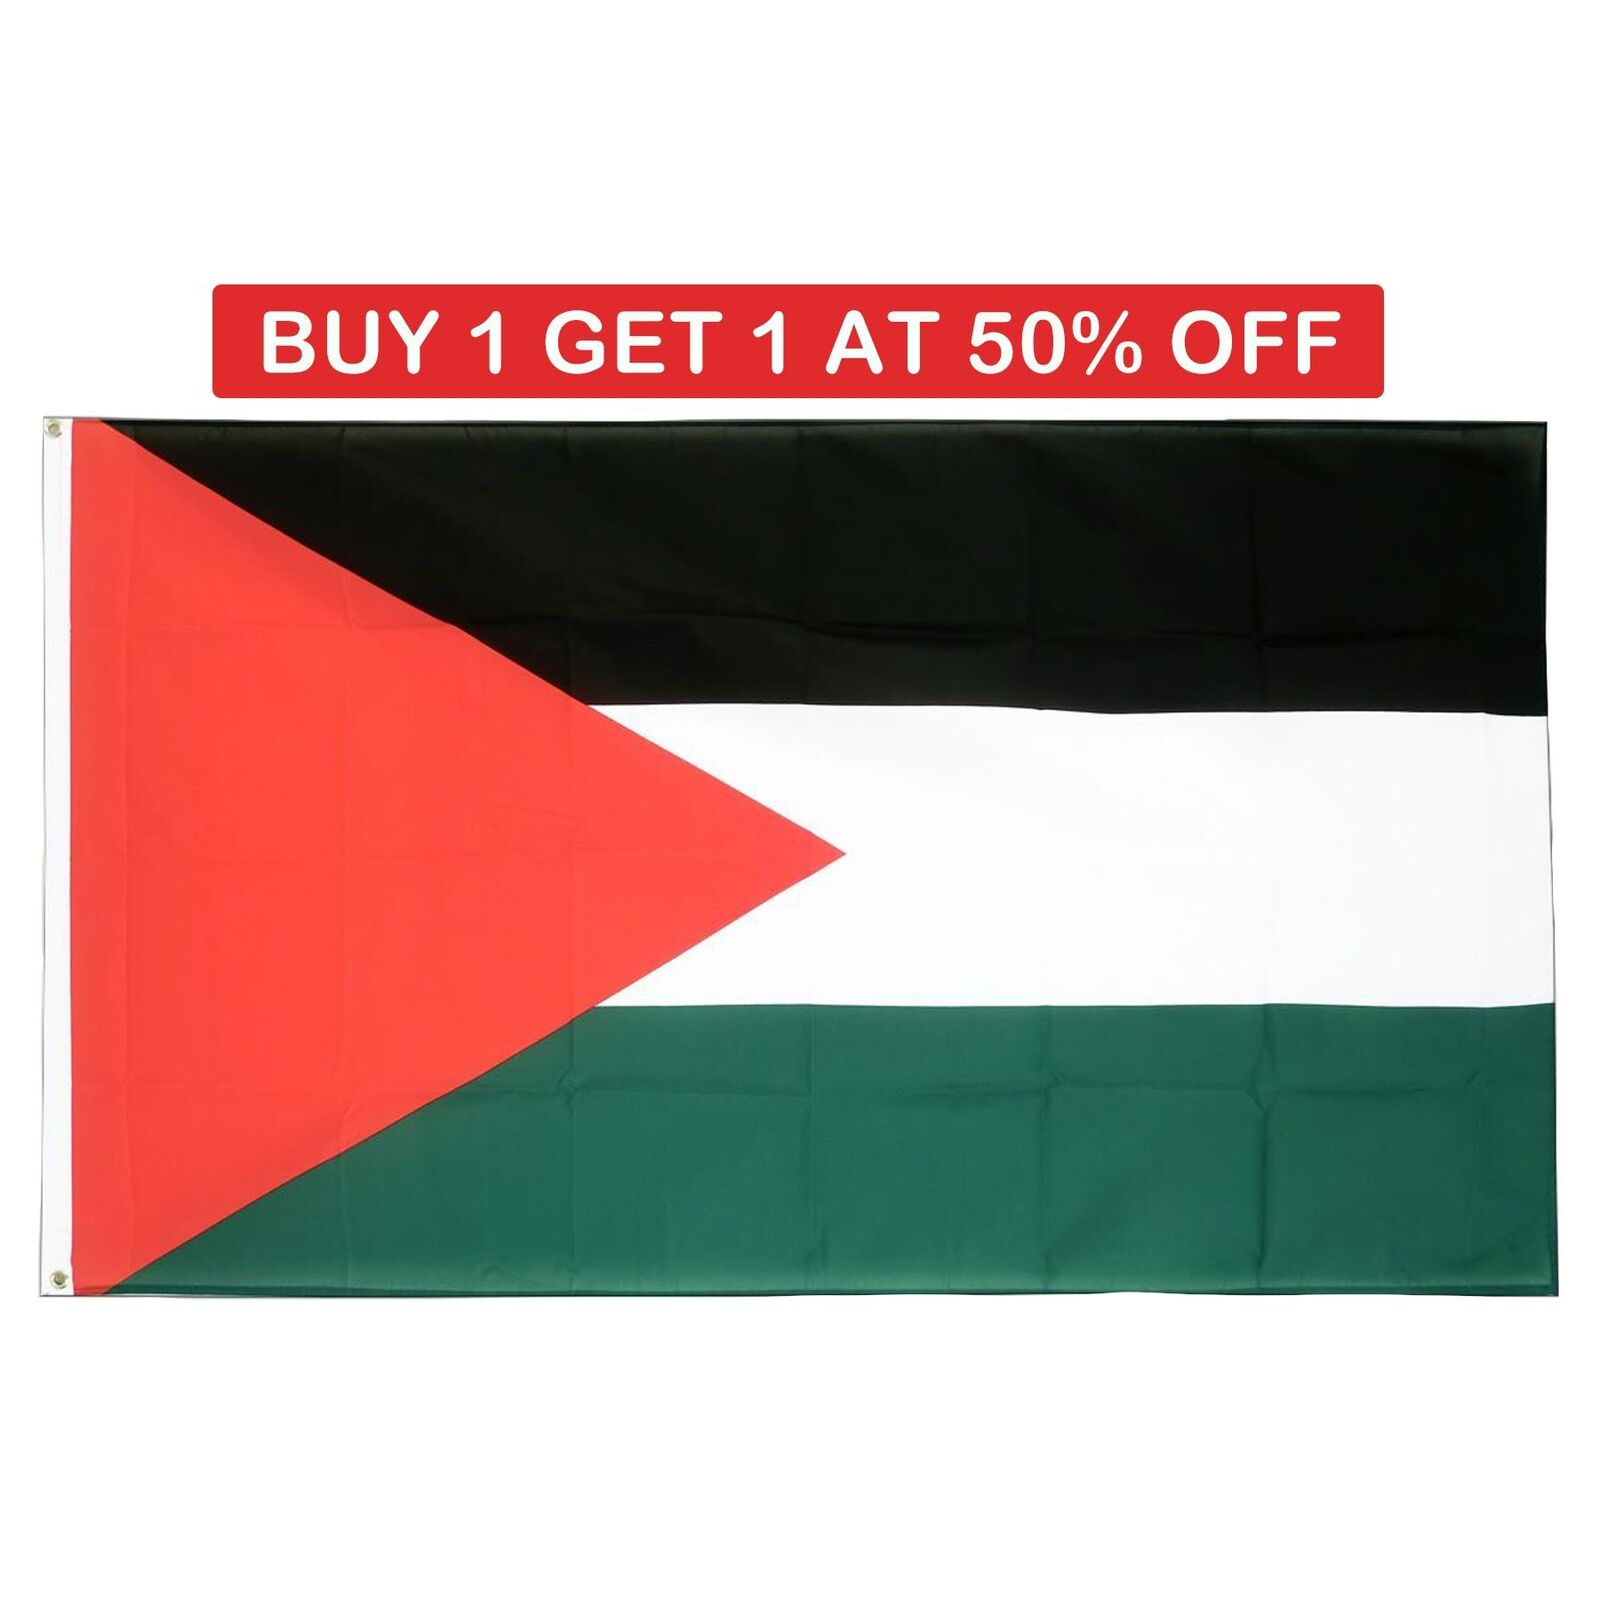 Palestine Flag Large Palestinian Middle East 5x3 FT Support Free Gaza West Bank